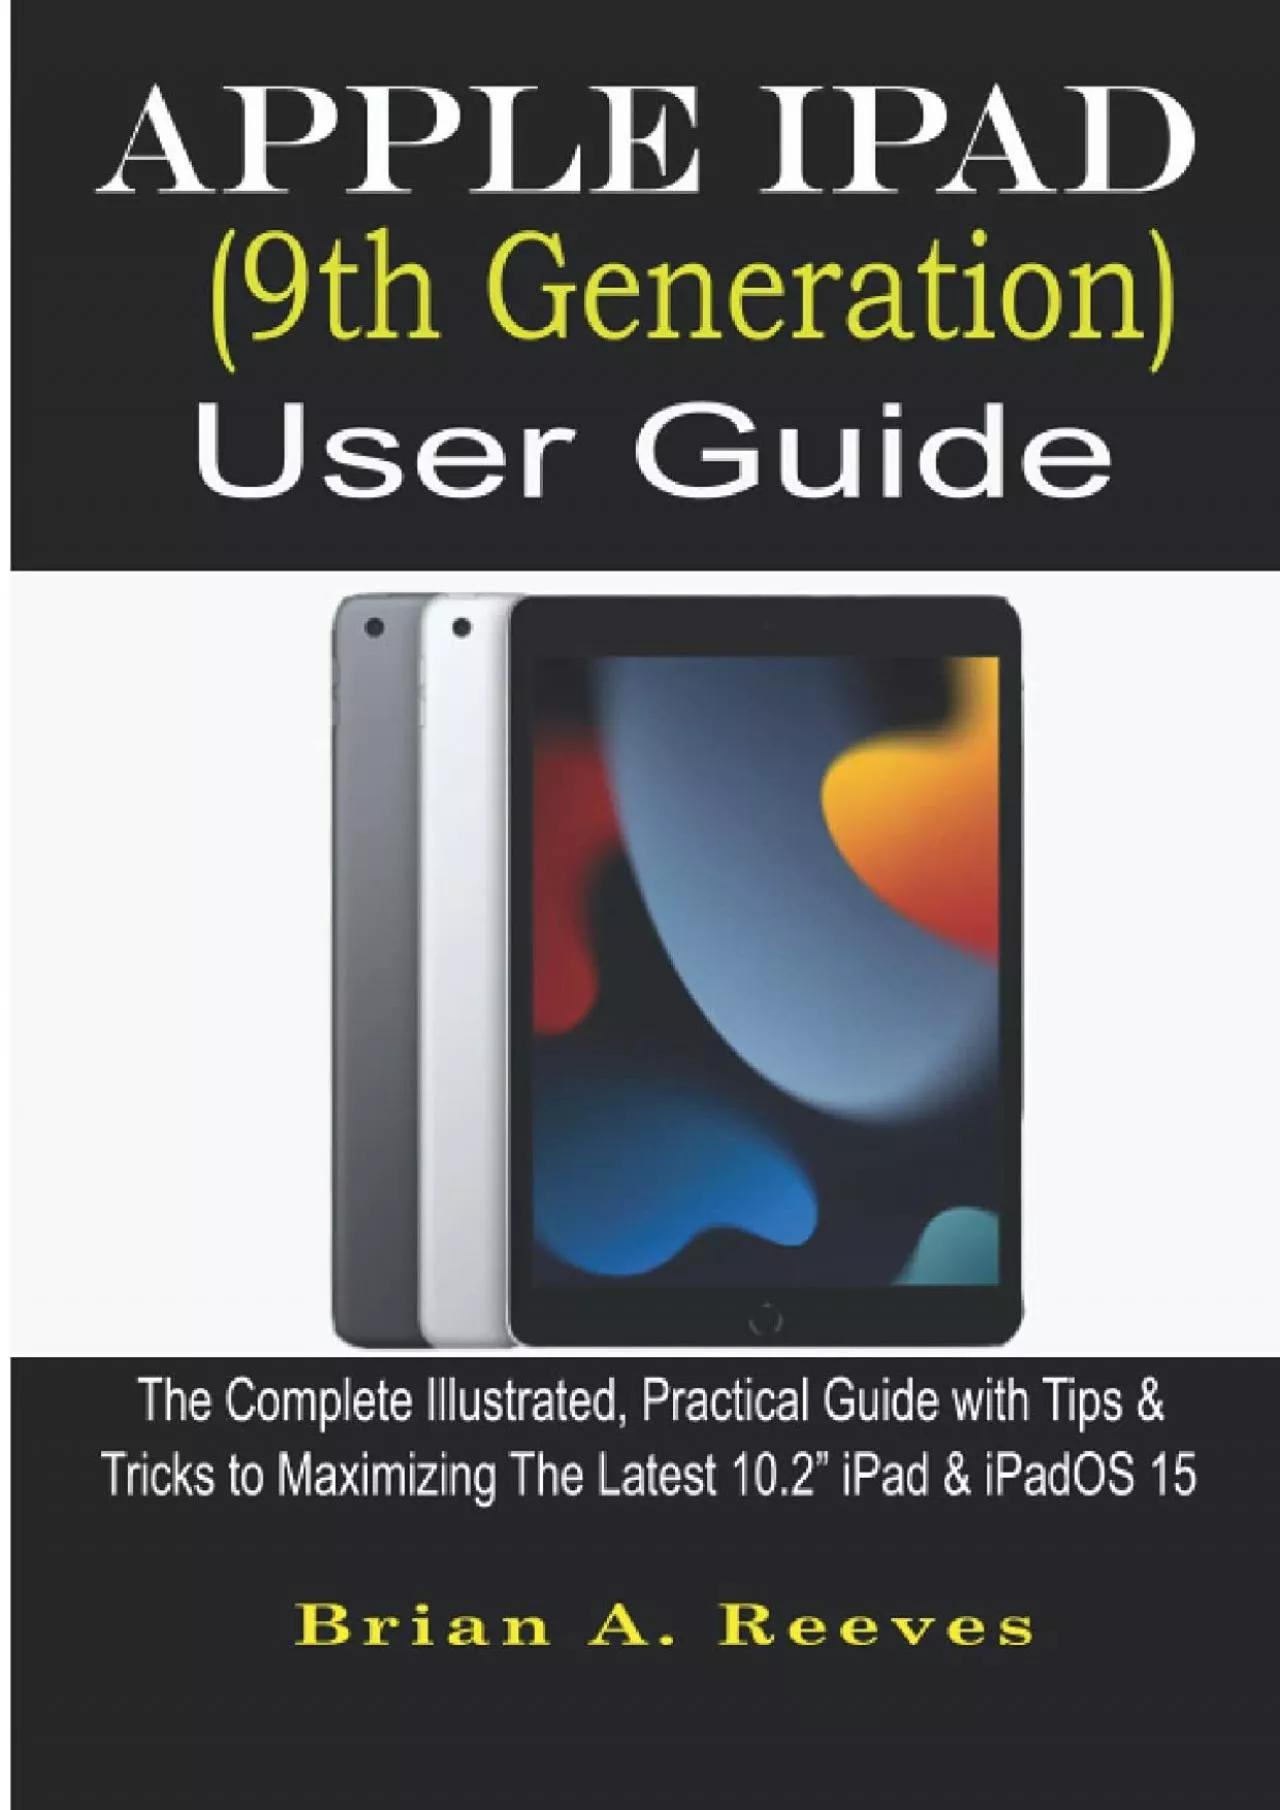 Apple iPad (9th Generation) User Guide: The Complete Illustrated, Practical Guide with